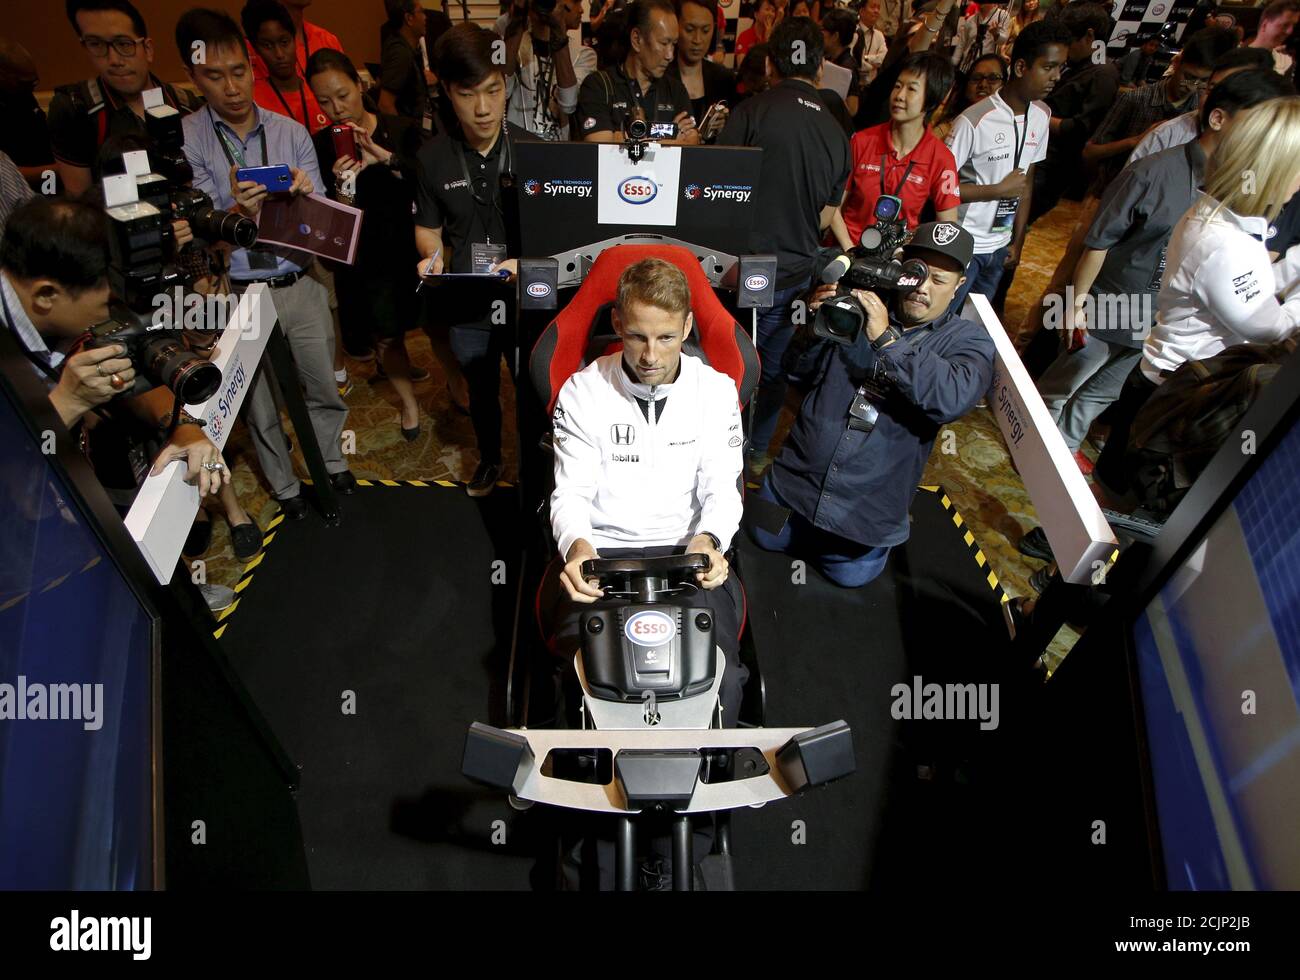 McLaren Formula One driver Jenson Button of Britain races in a virtual simulator during publicity events ahead of the Singapore F1 night race in Singapore September 16, 2015. The Singapore F1 Grand Prix night race takes place from September 18, 2015. REUTERS/Edgar Su Stock Photo